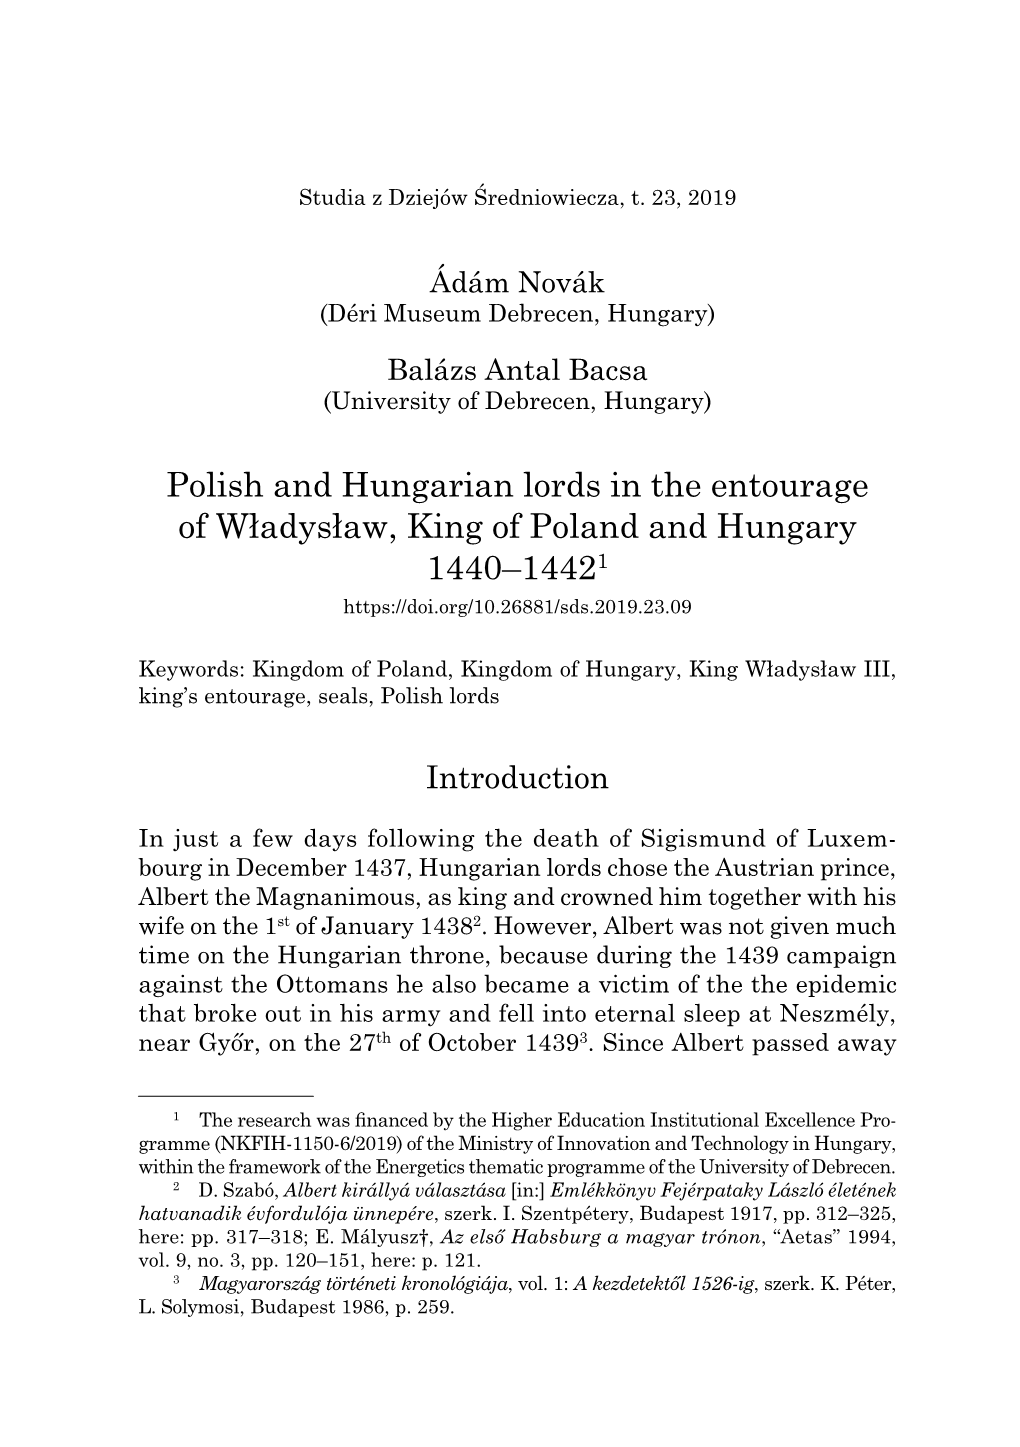 Polish and Hungarian Lords in the Entourage of Władysław, King of Poland and Hungary 1440–14421